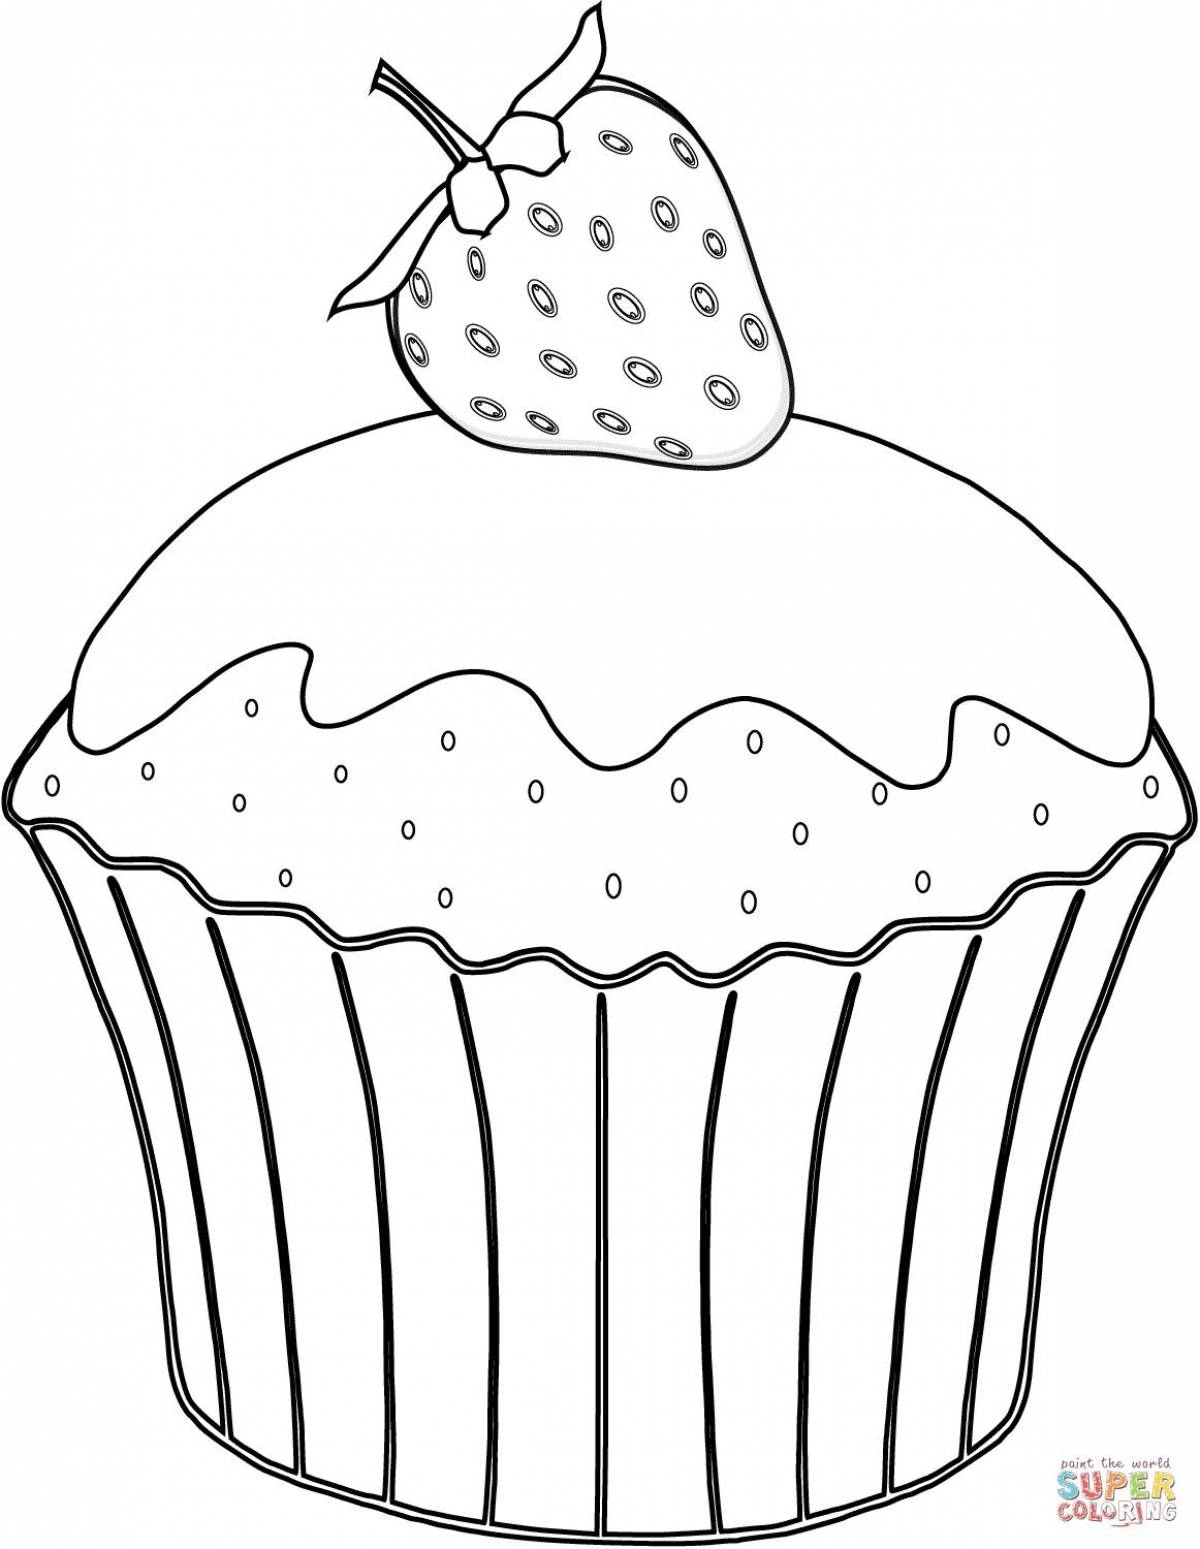 Coloring page lovely cupcake